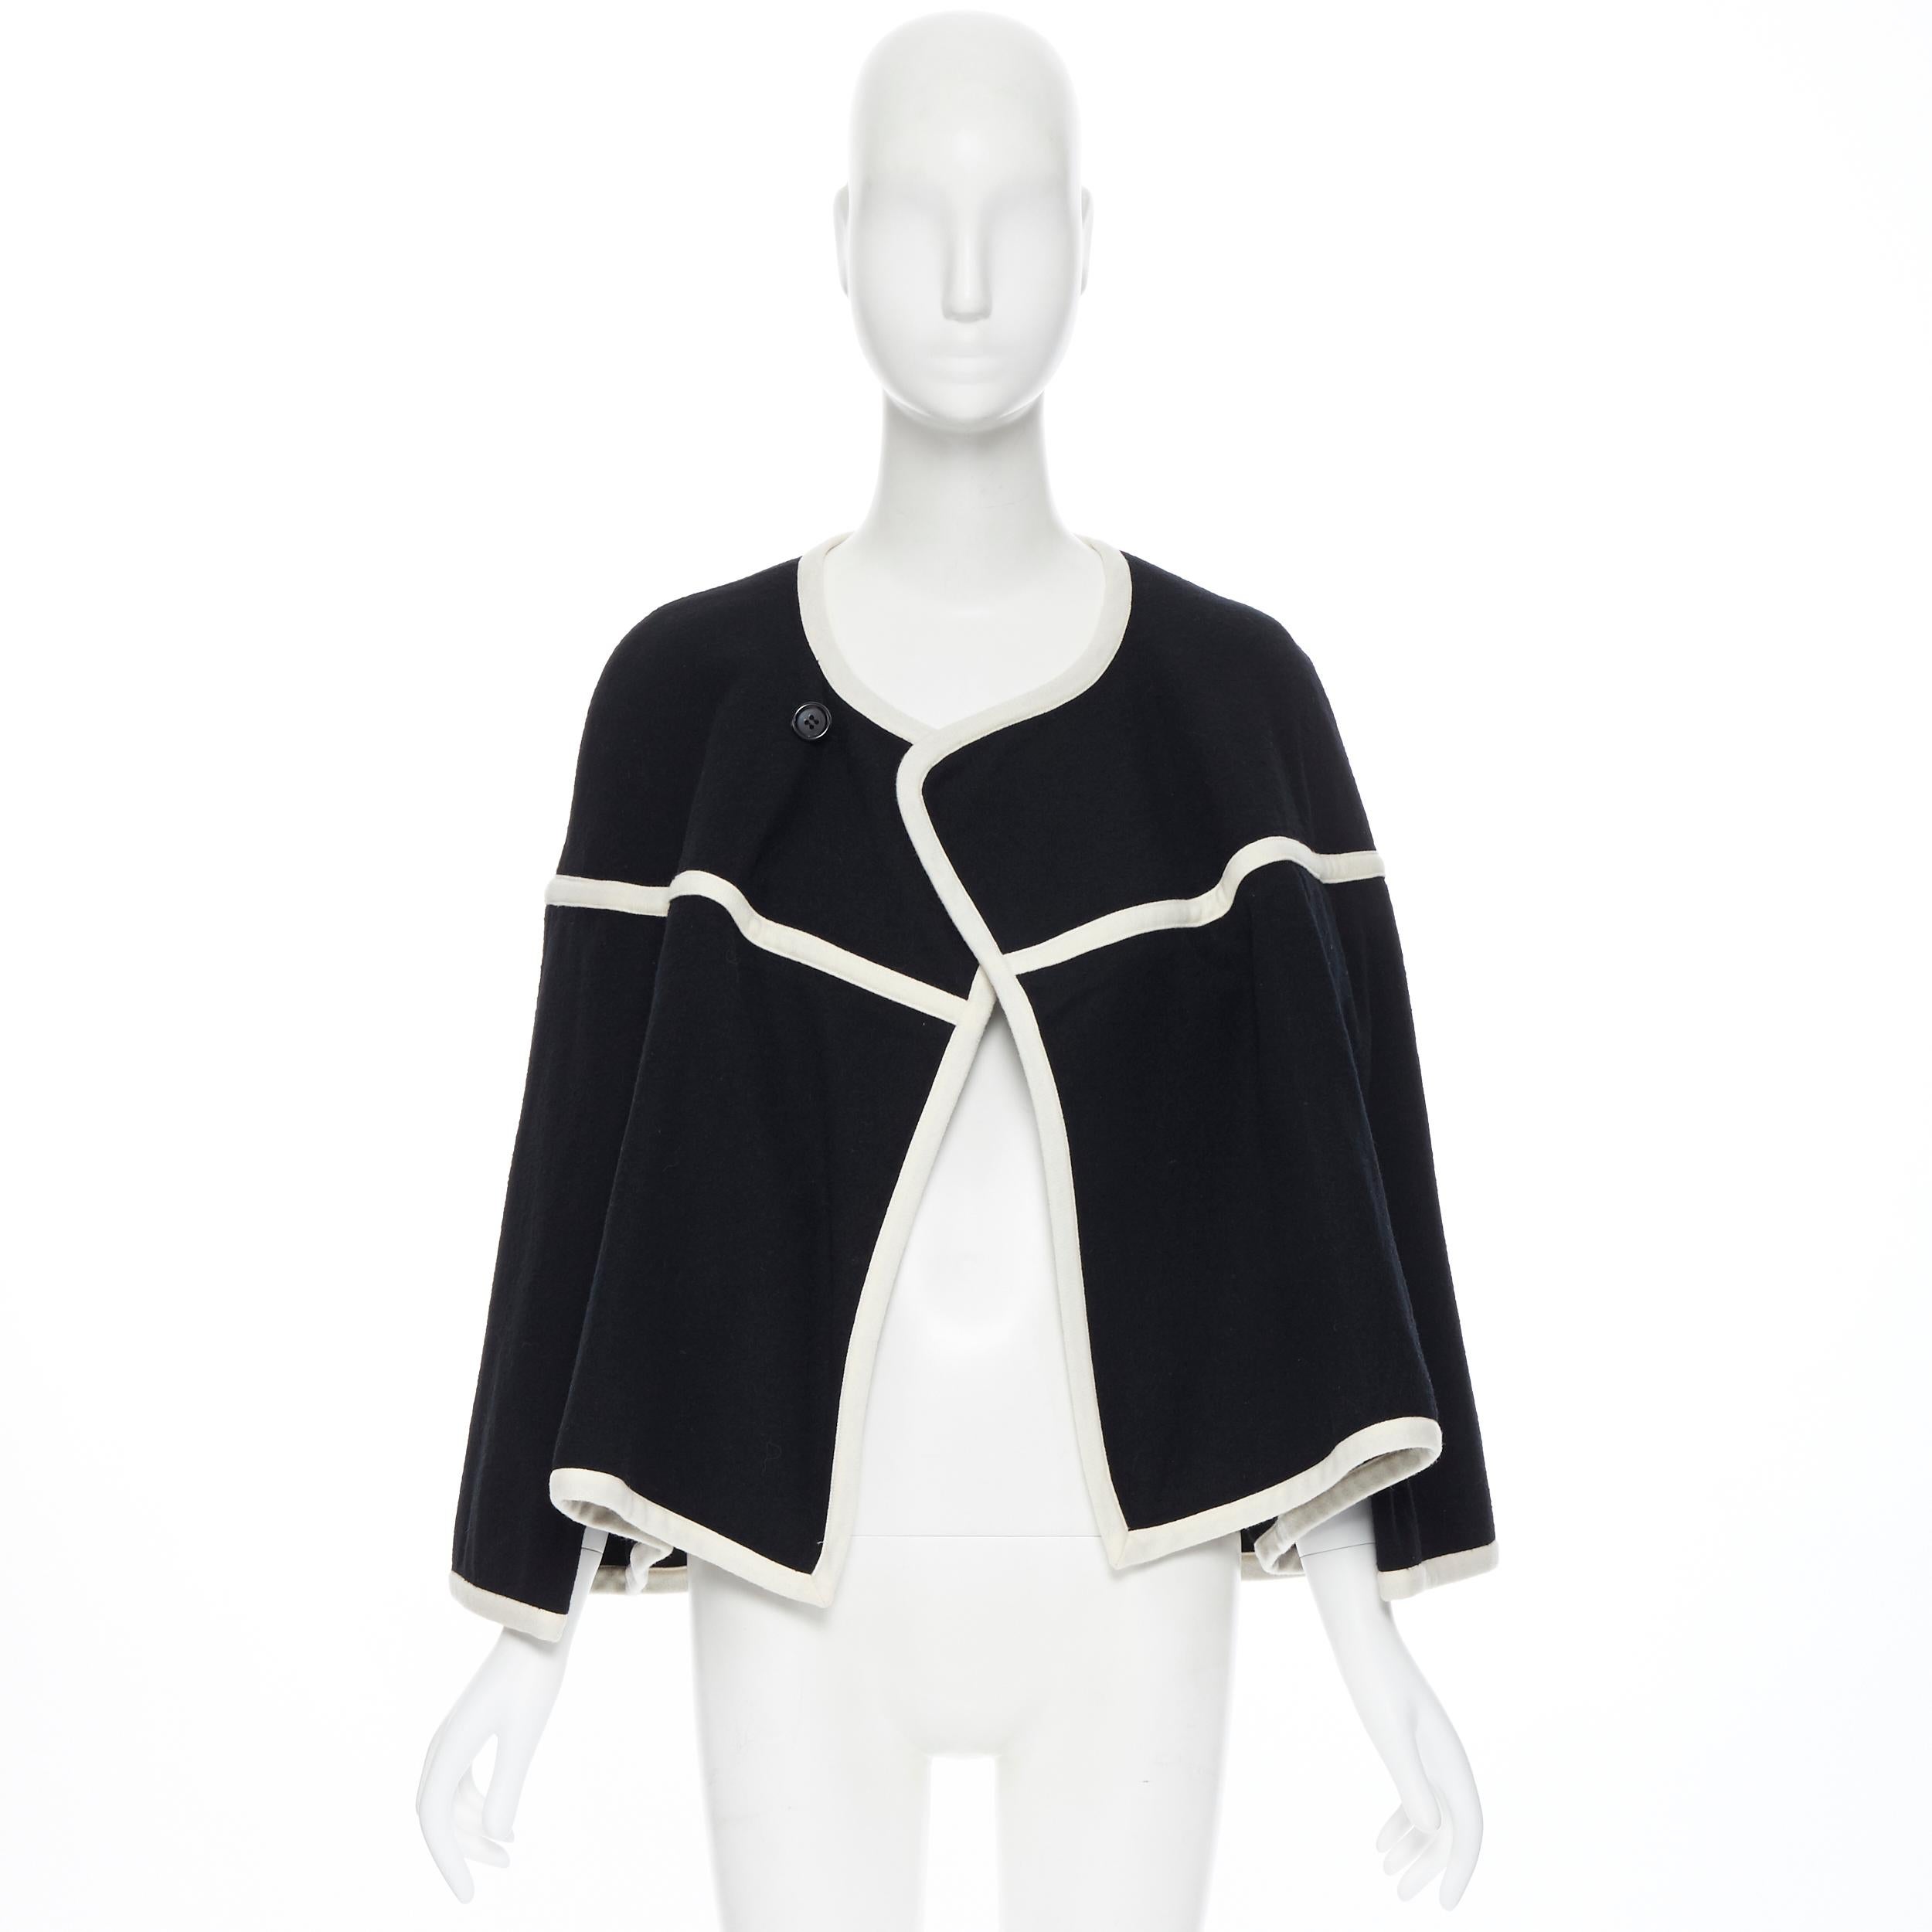 vintage COMME DES GARCONS 1989 Runway black white trimmed cape poncho jacket M 
Reference: CRTI/A00258 
Brand: Comme Des Garcons 
Designer: Rei Kawakubo 
Collection: 1989 Runway 
Material: Wool 
Color: Black 
Pattern: Solid 
Closure: Button 
Extra